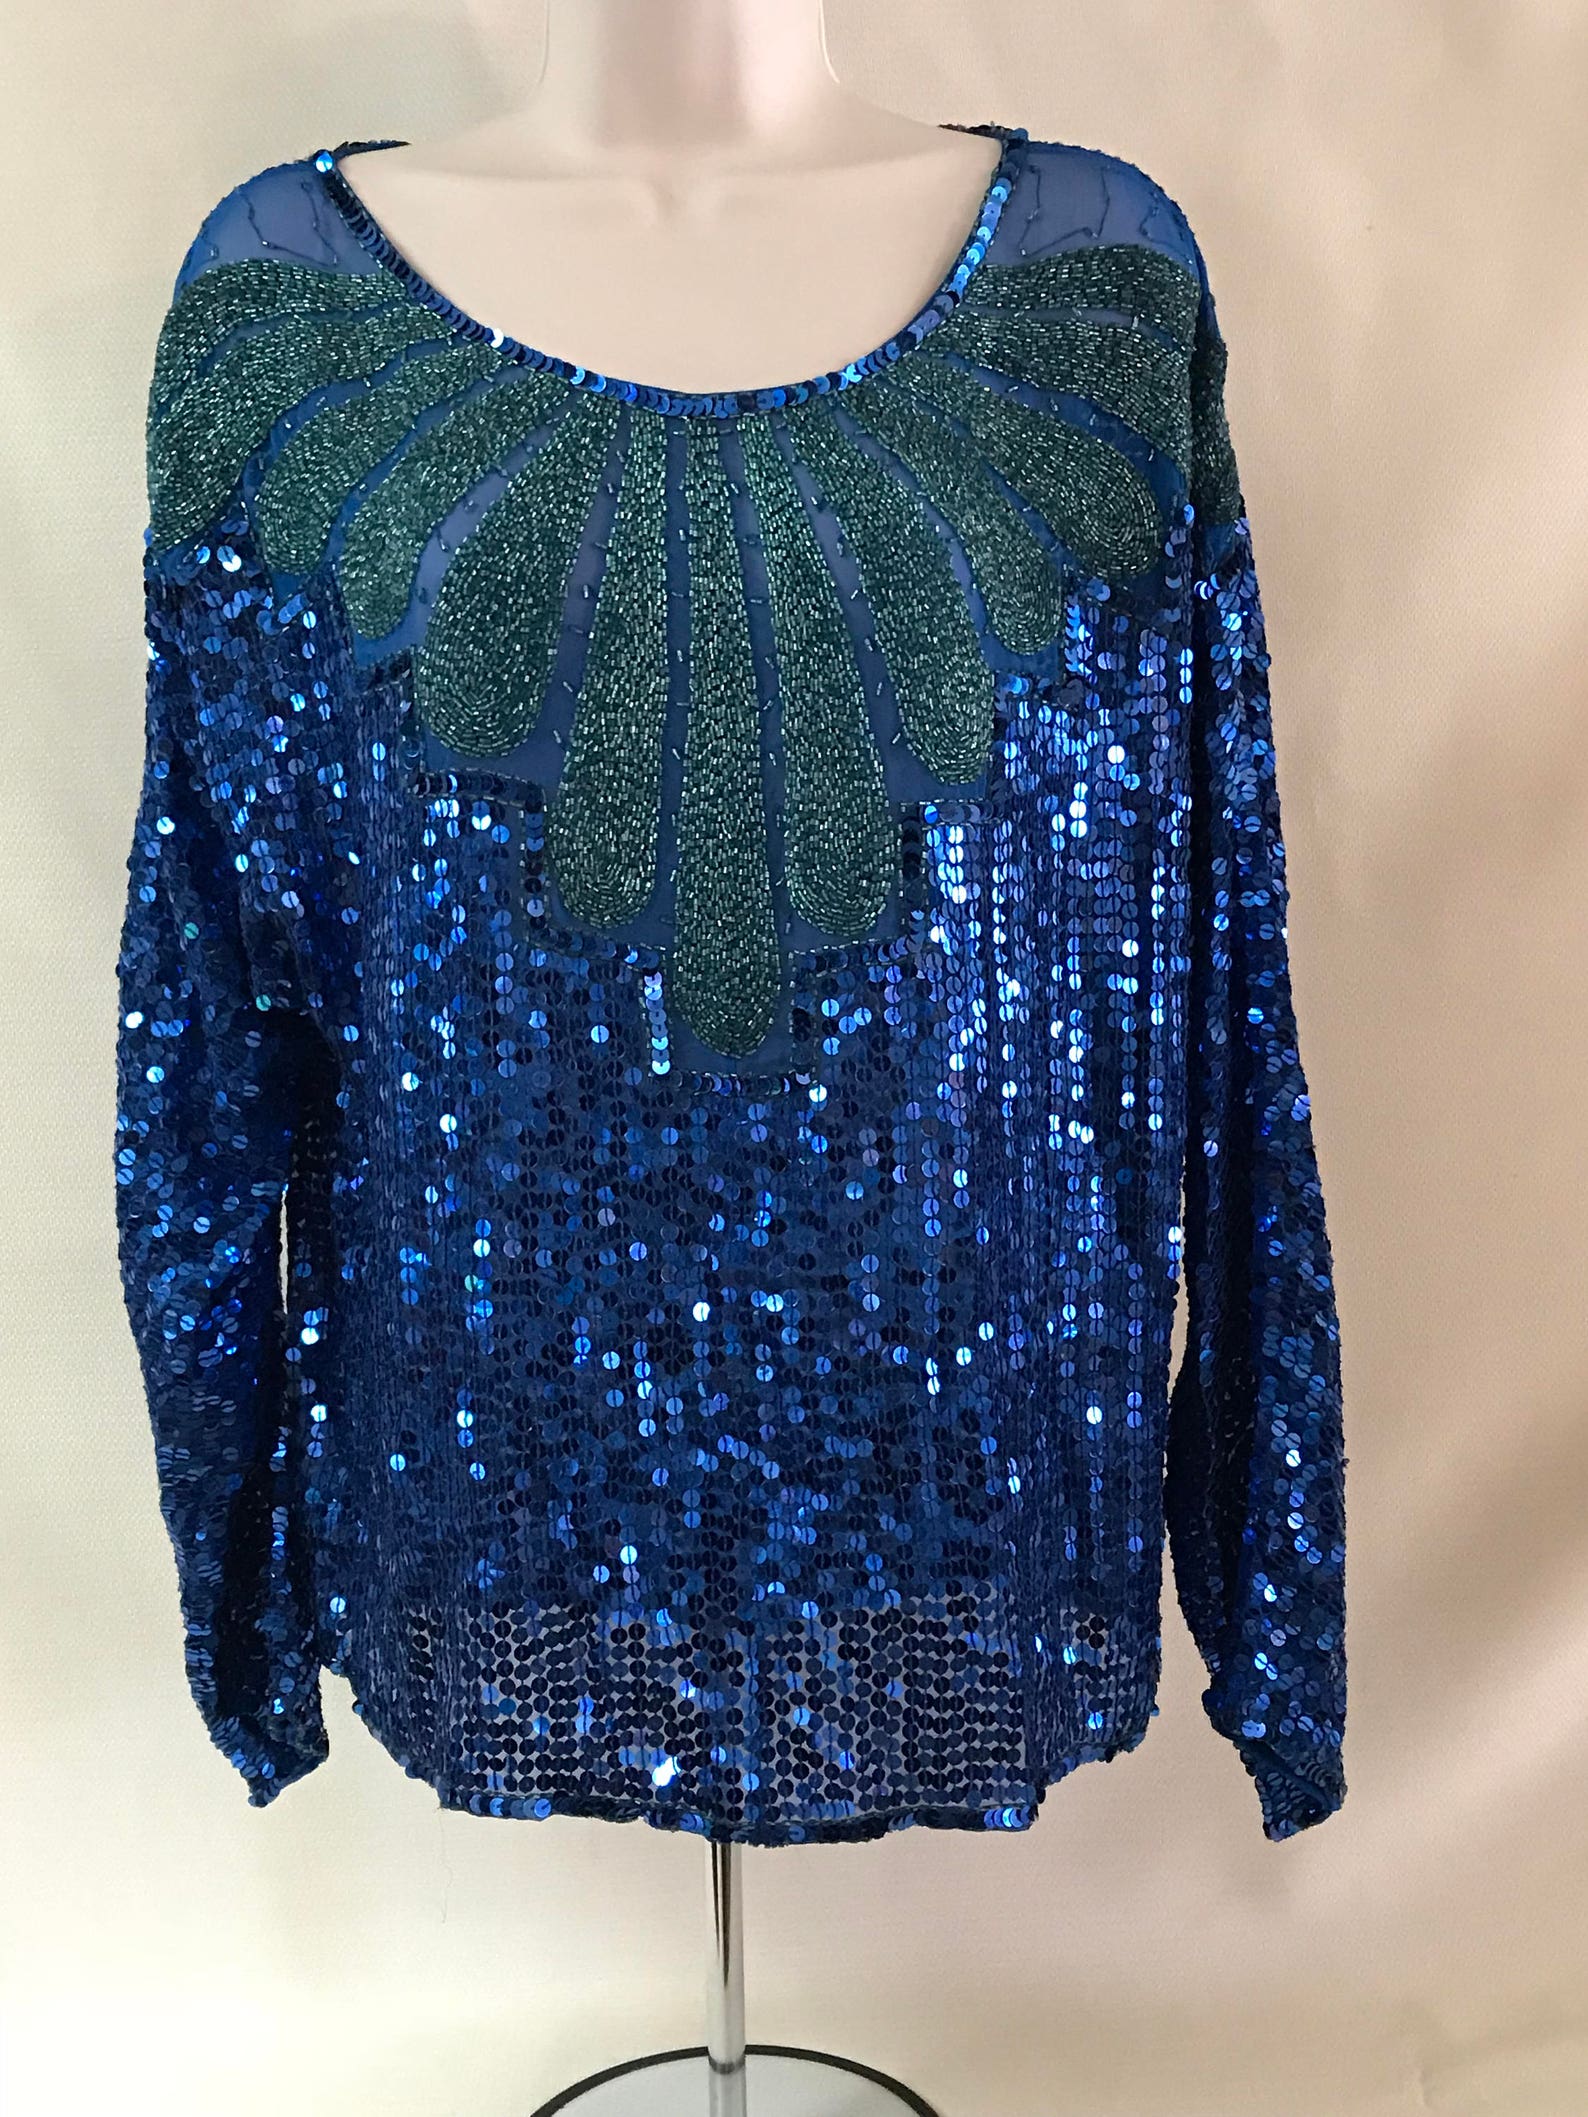 Women's Sheer Sequin Blouse Top Tunic With Peacock Blue | Etsy